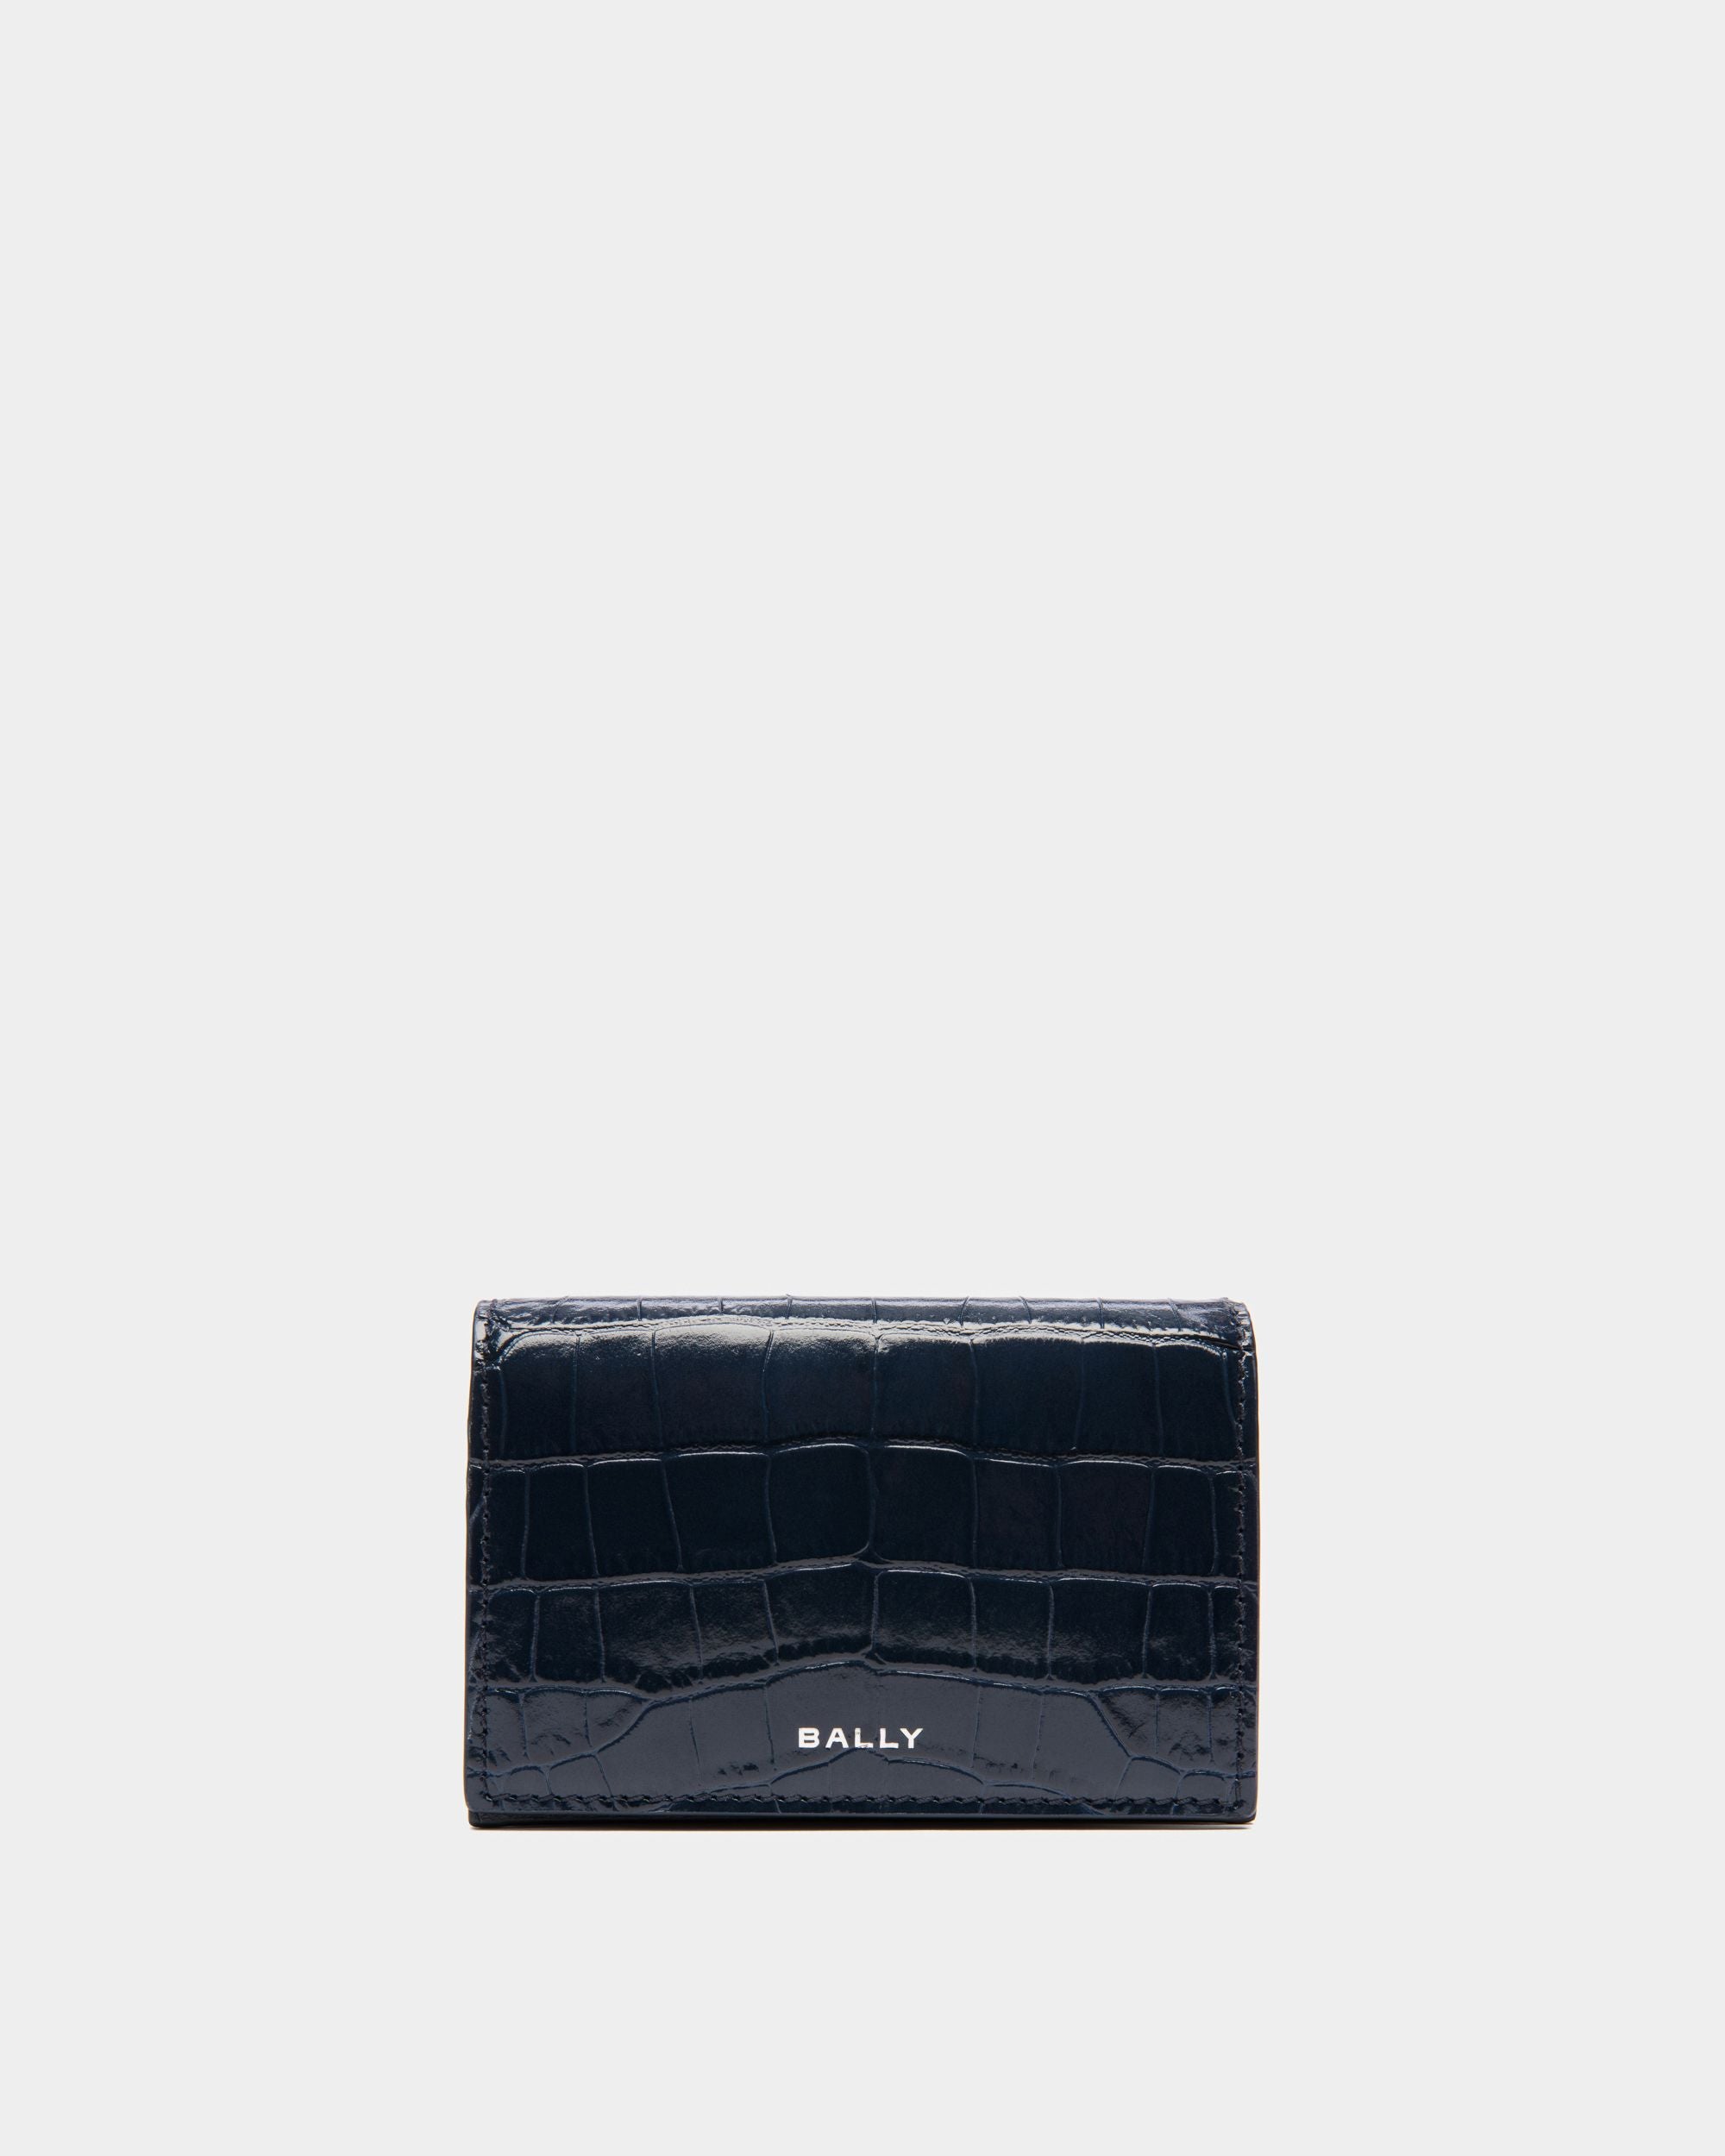 Busy Bally | Men's Business Card Case in Blue Crocodile Print Leather | Bally | Still Life Front